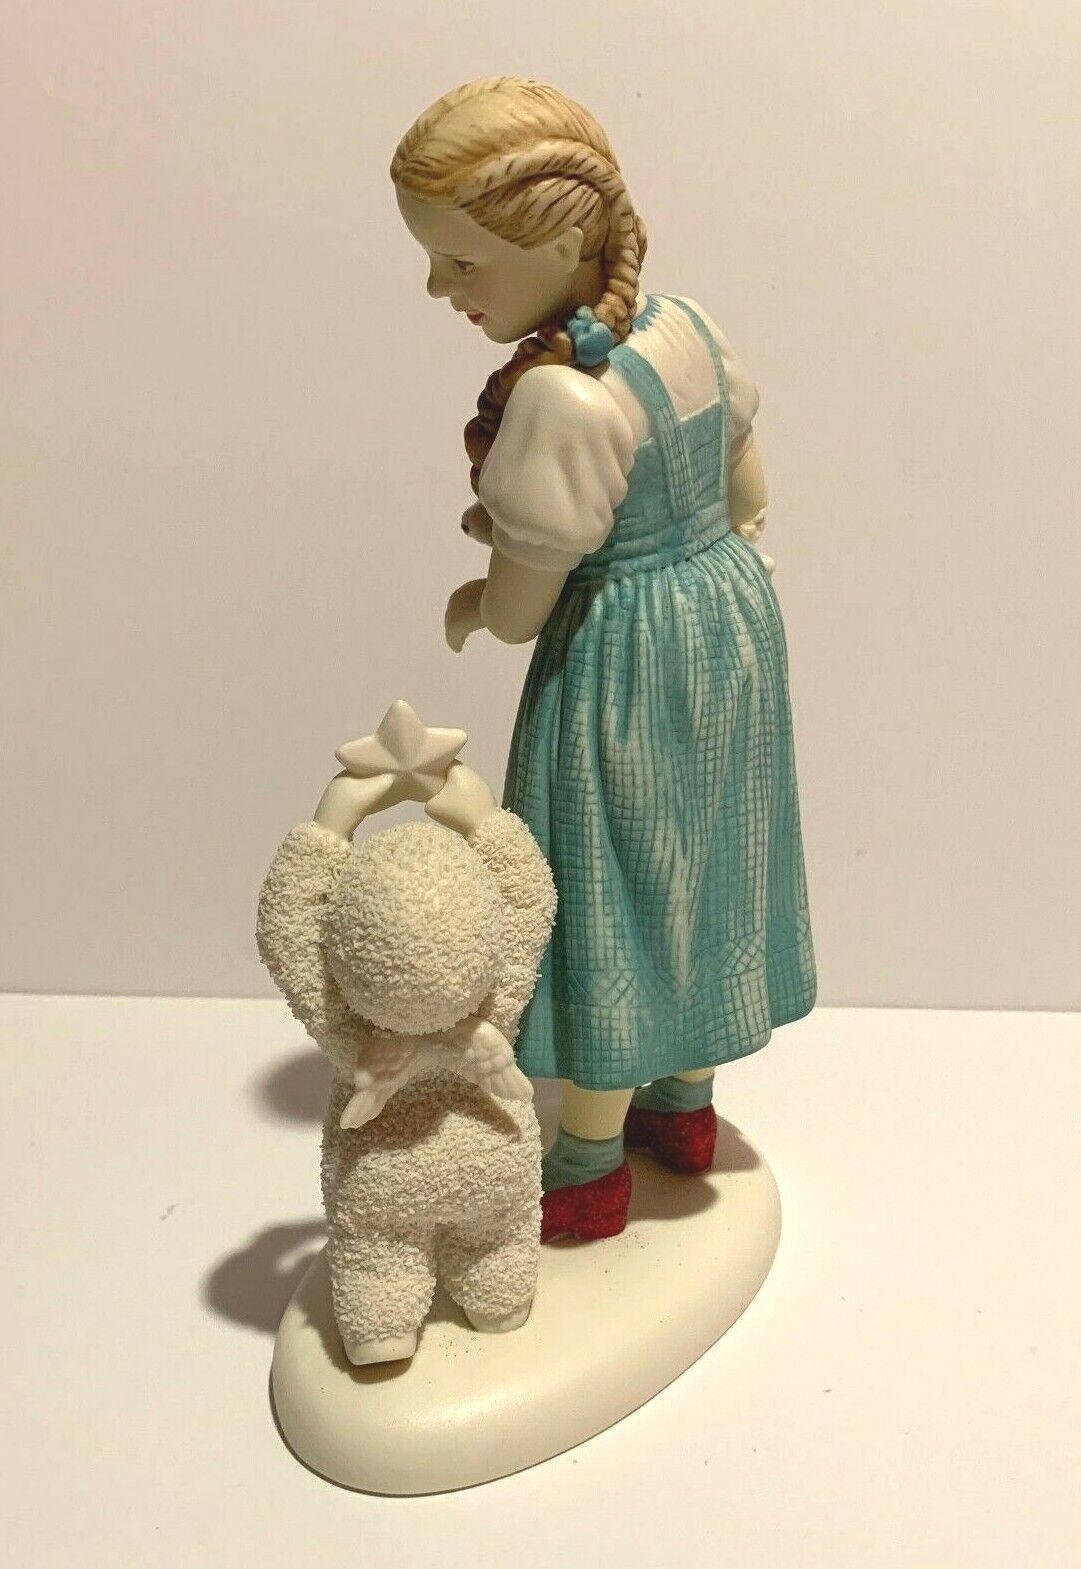 DEPT 56 SNOWBABIES THE GUEST COLLECTION THE WIZARD OF OZ DOROTHY & TOTO 1998